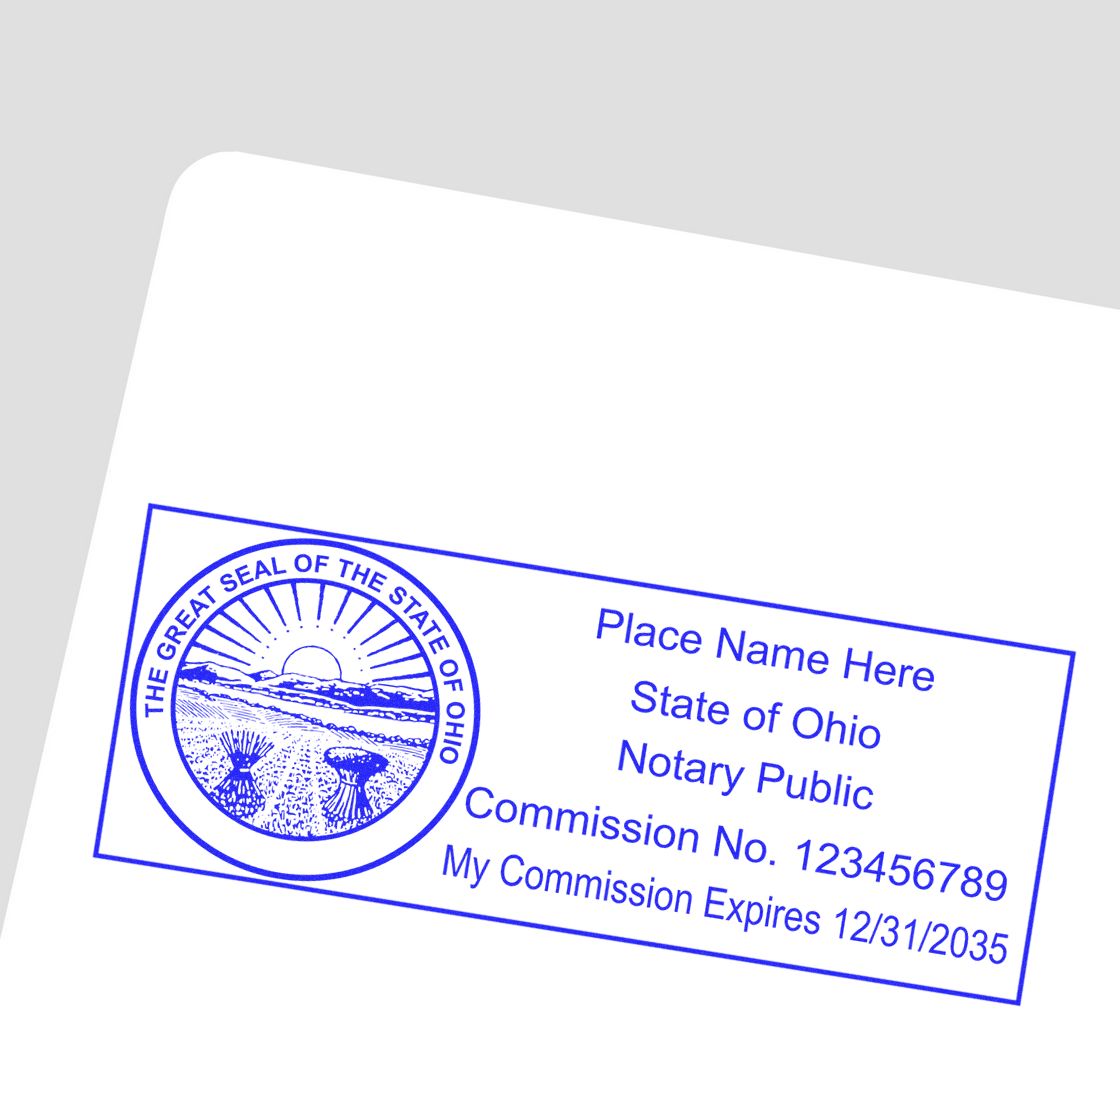 The MaxLight Premium Pre-Inked Ohio State Seal Notarial Stamp stamp impression comes to life with a crisp, detailed photo on paper - showcasing true professional quality.